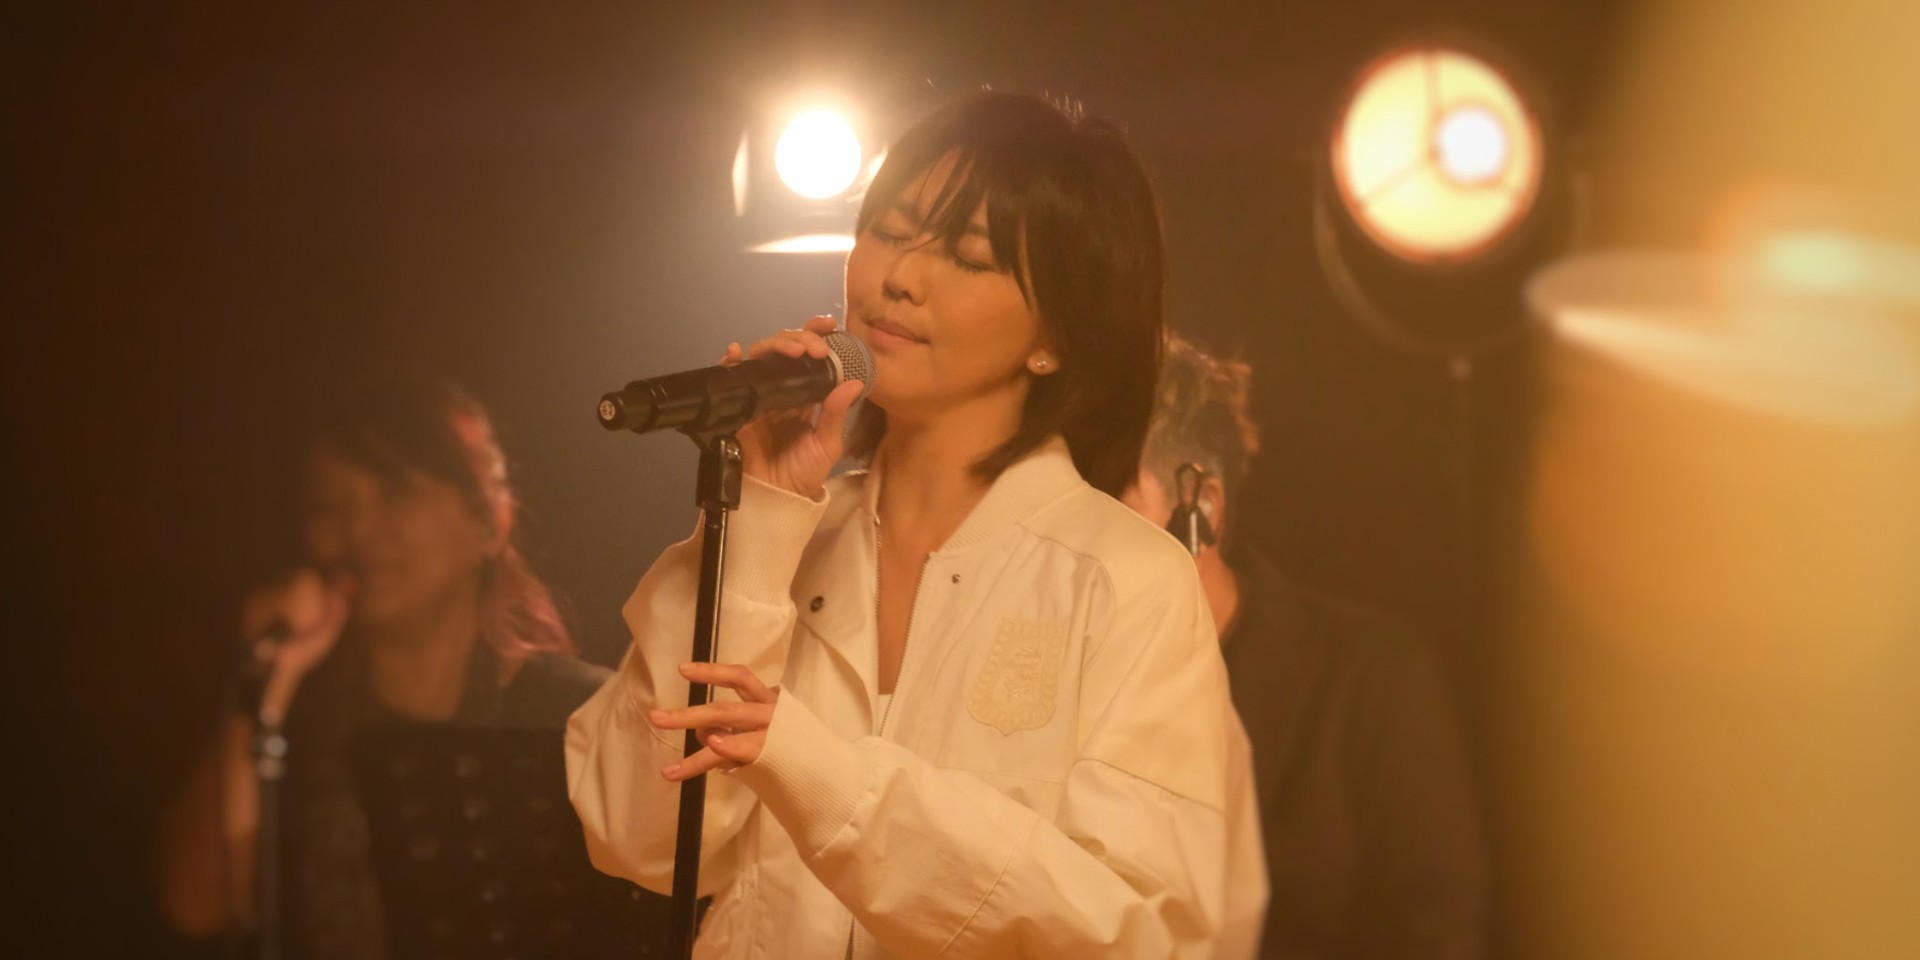 Here's how to watch Stefanie Sun's virtual concert from last week